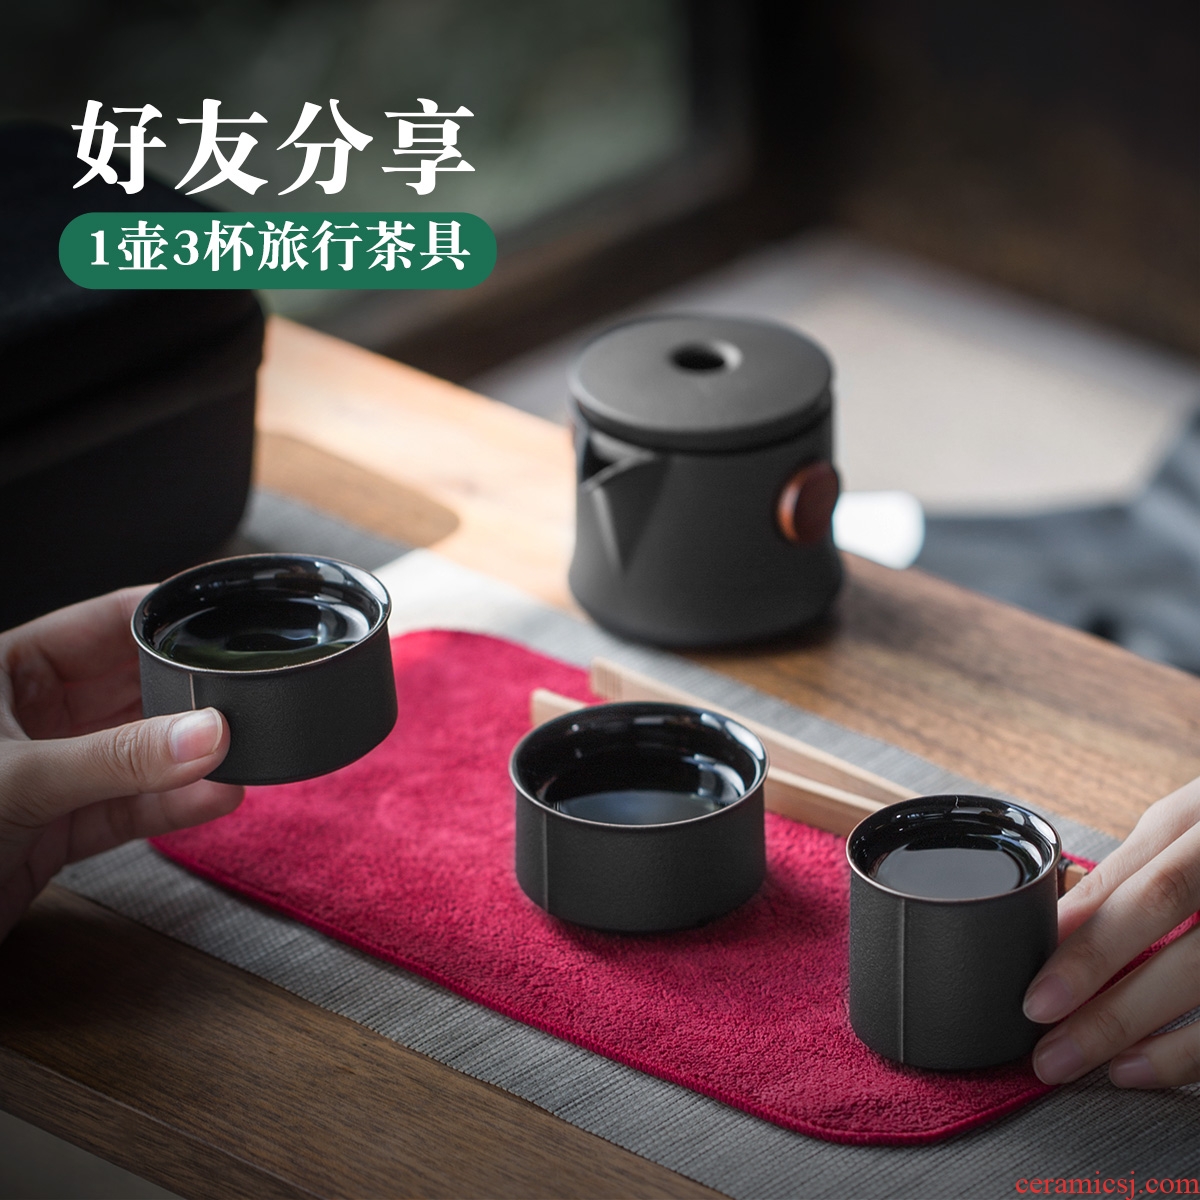 Evan ceramic kung fu tea set Japanese contracted portable tea crack set a pot of three is suing travel